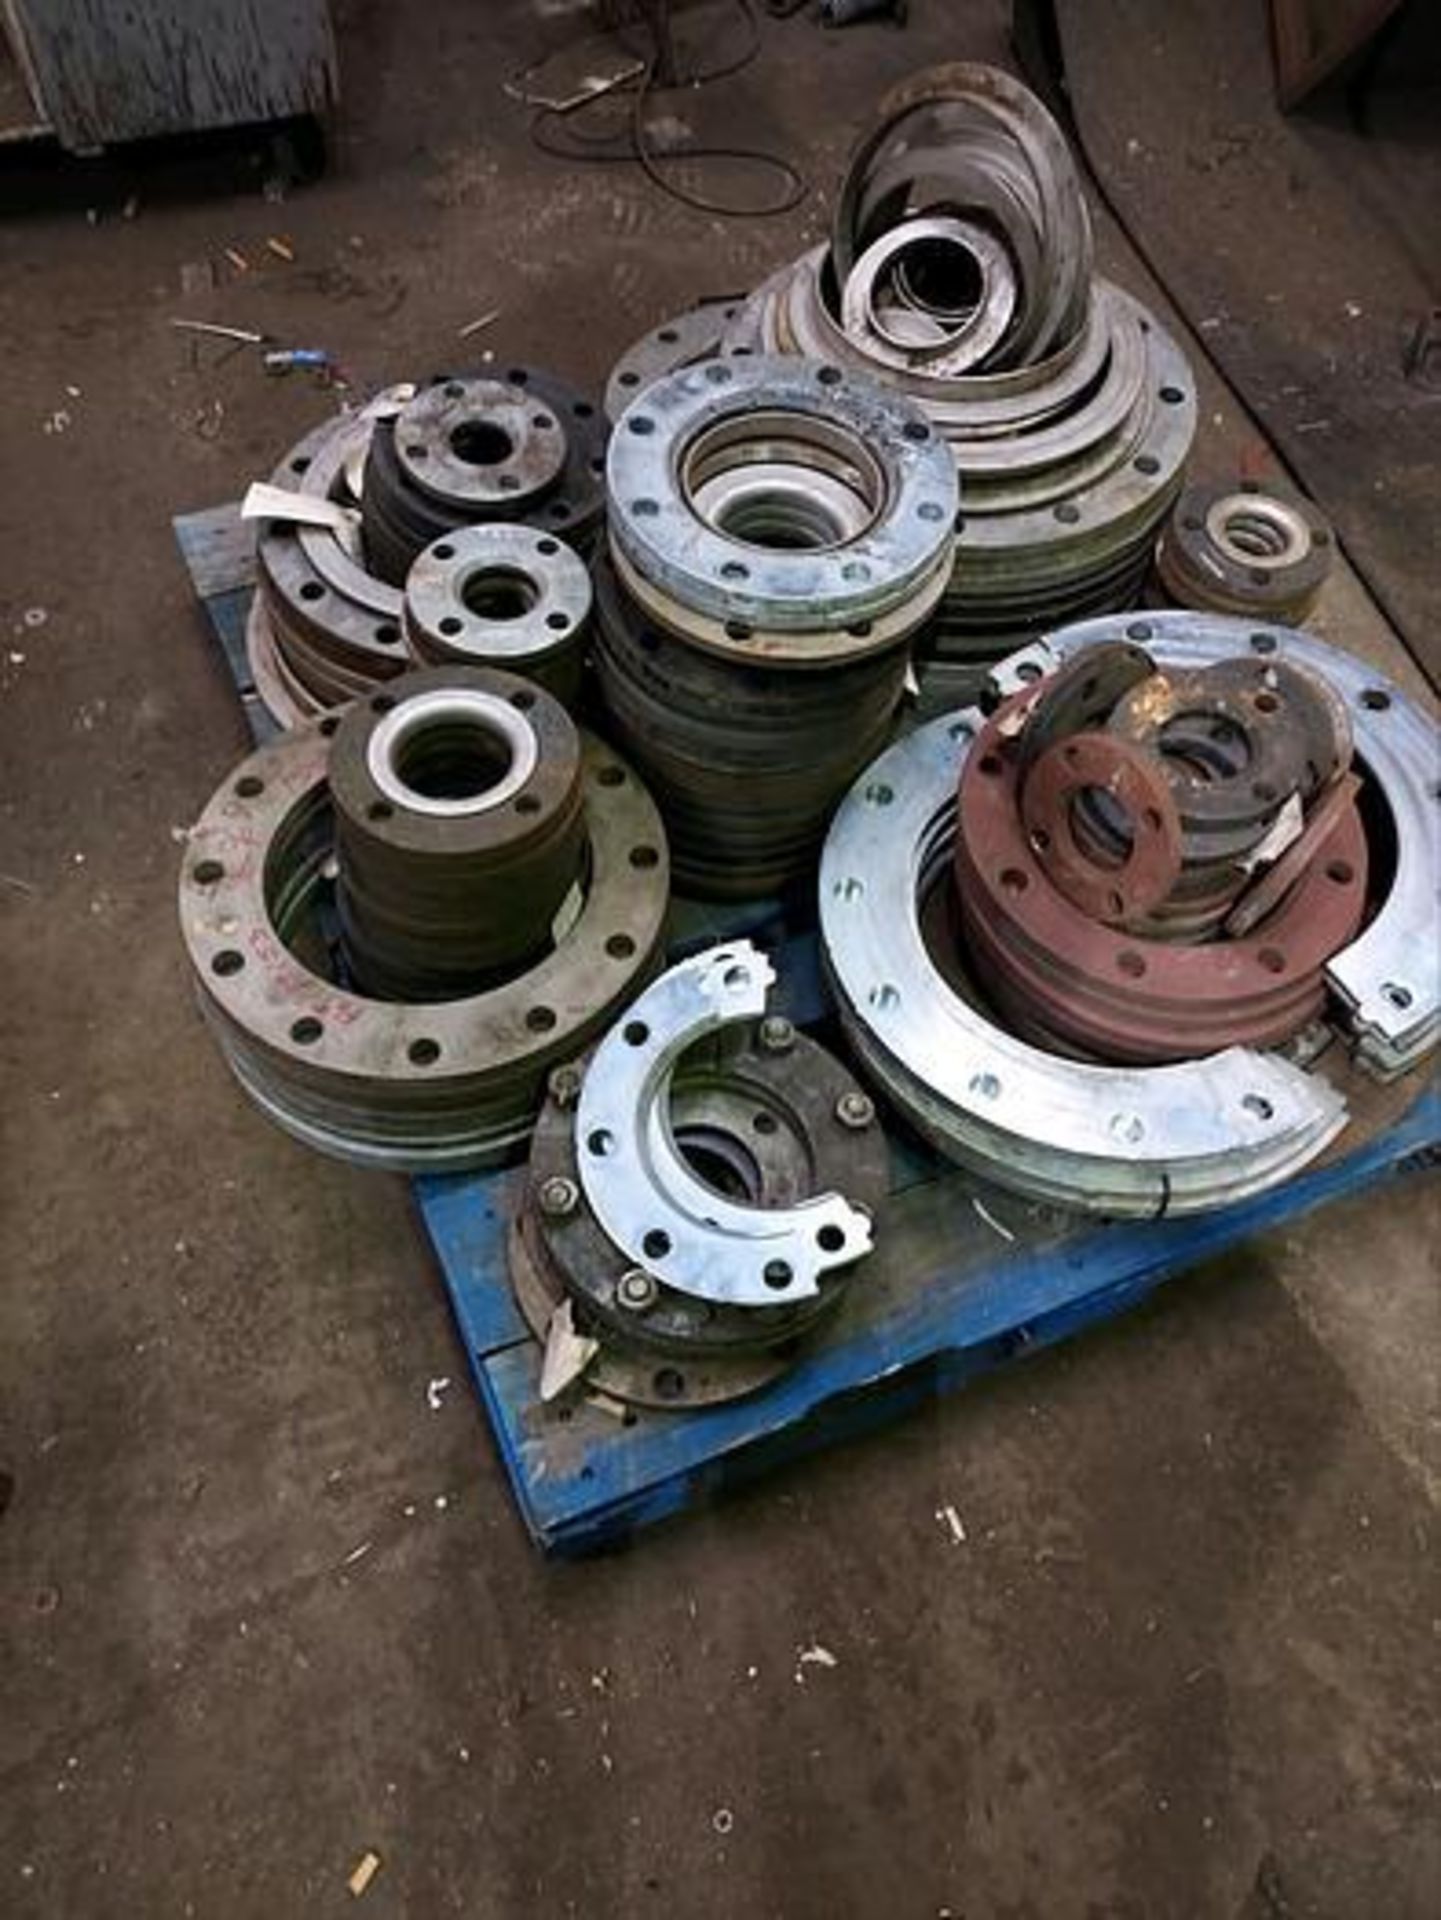 METAL FLANGES RINGS AND TUBING IN VARIOUS SIZES - Image 3 of 4